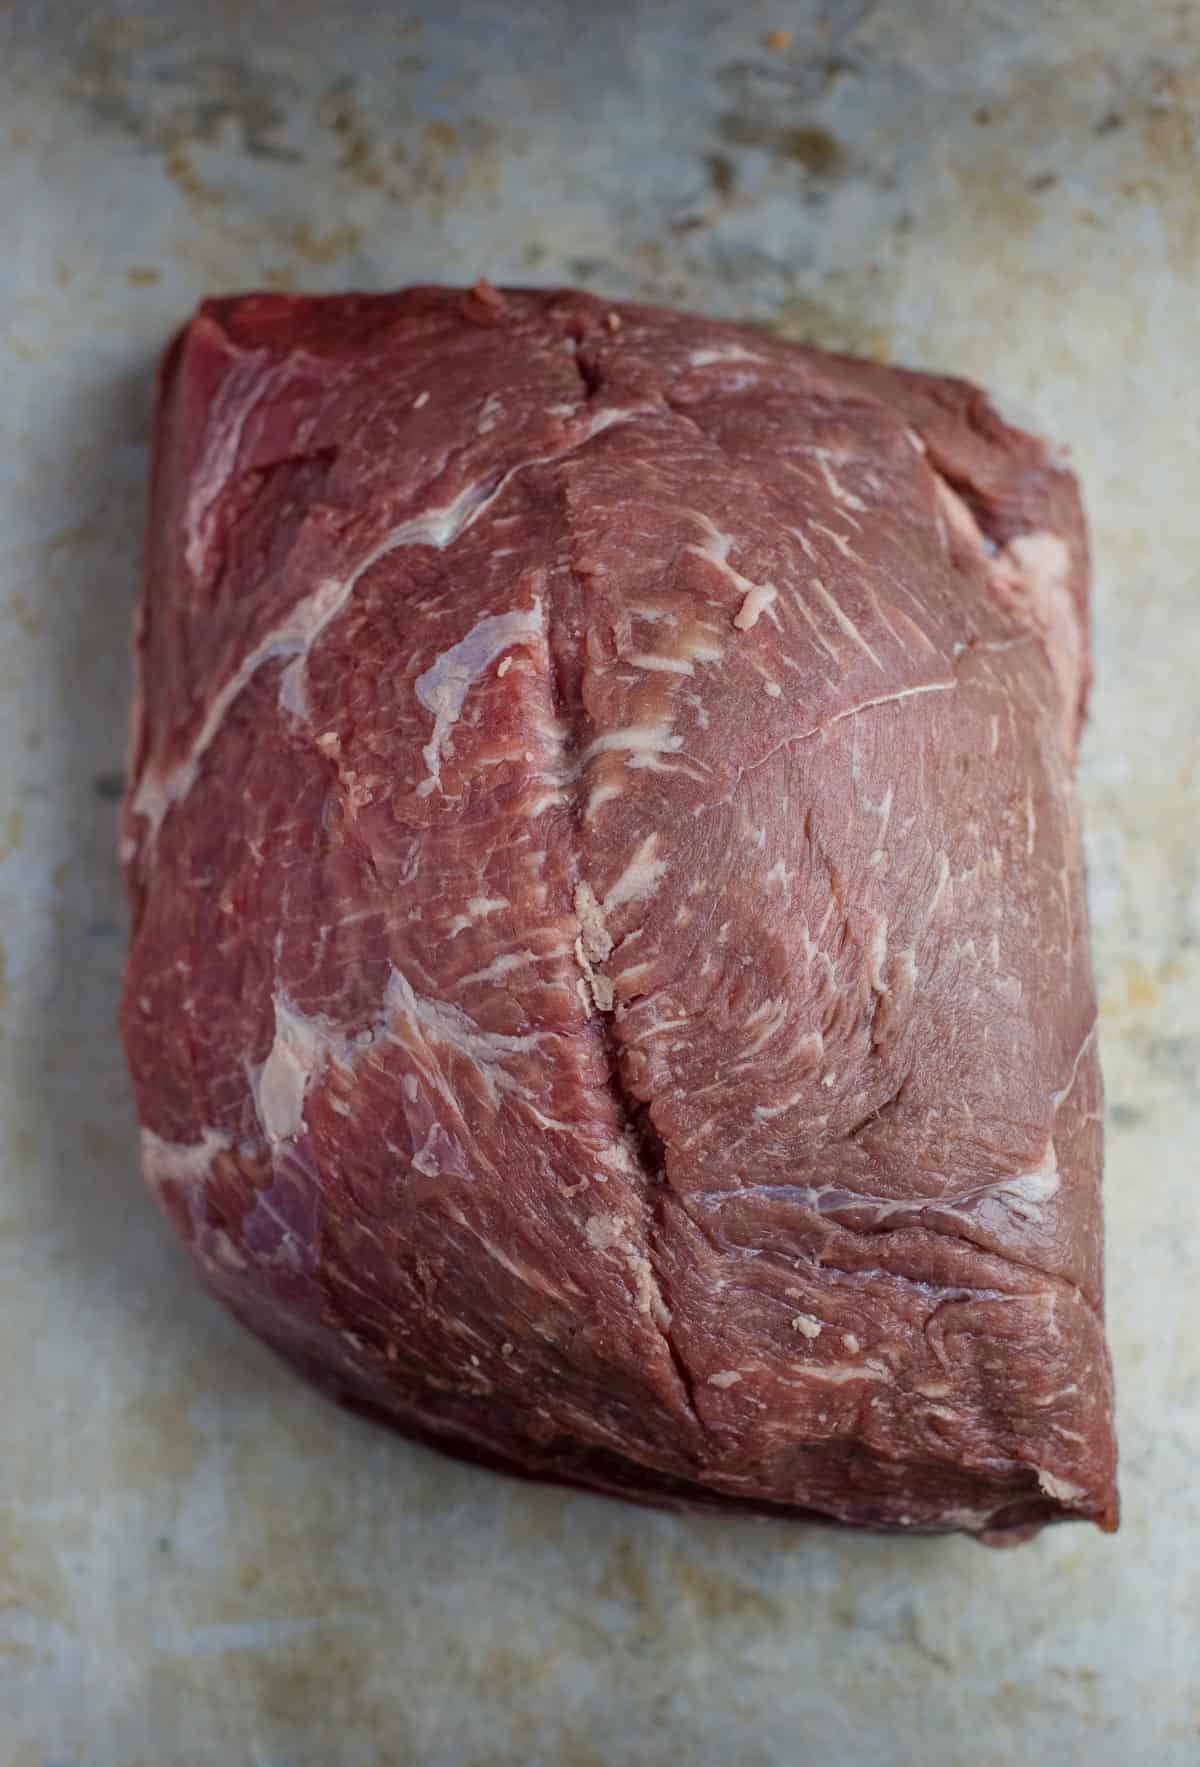 Trimmed 6 pound raw meat roast